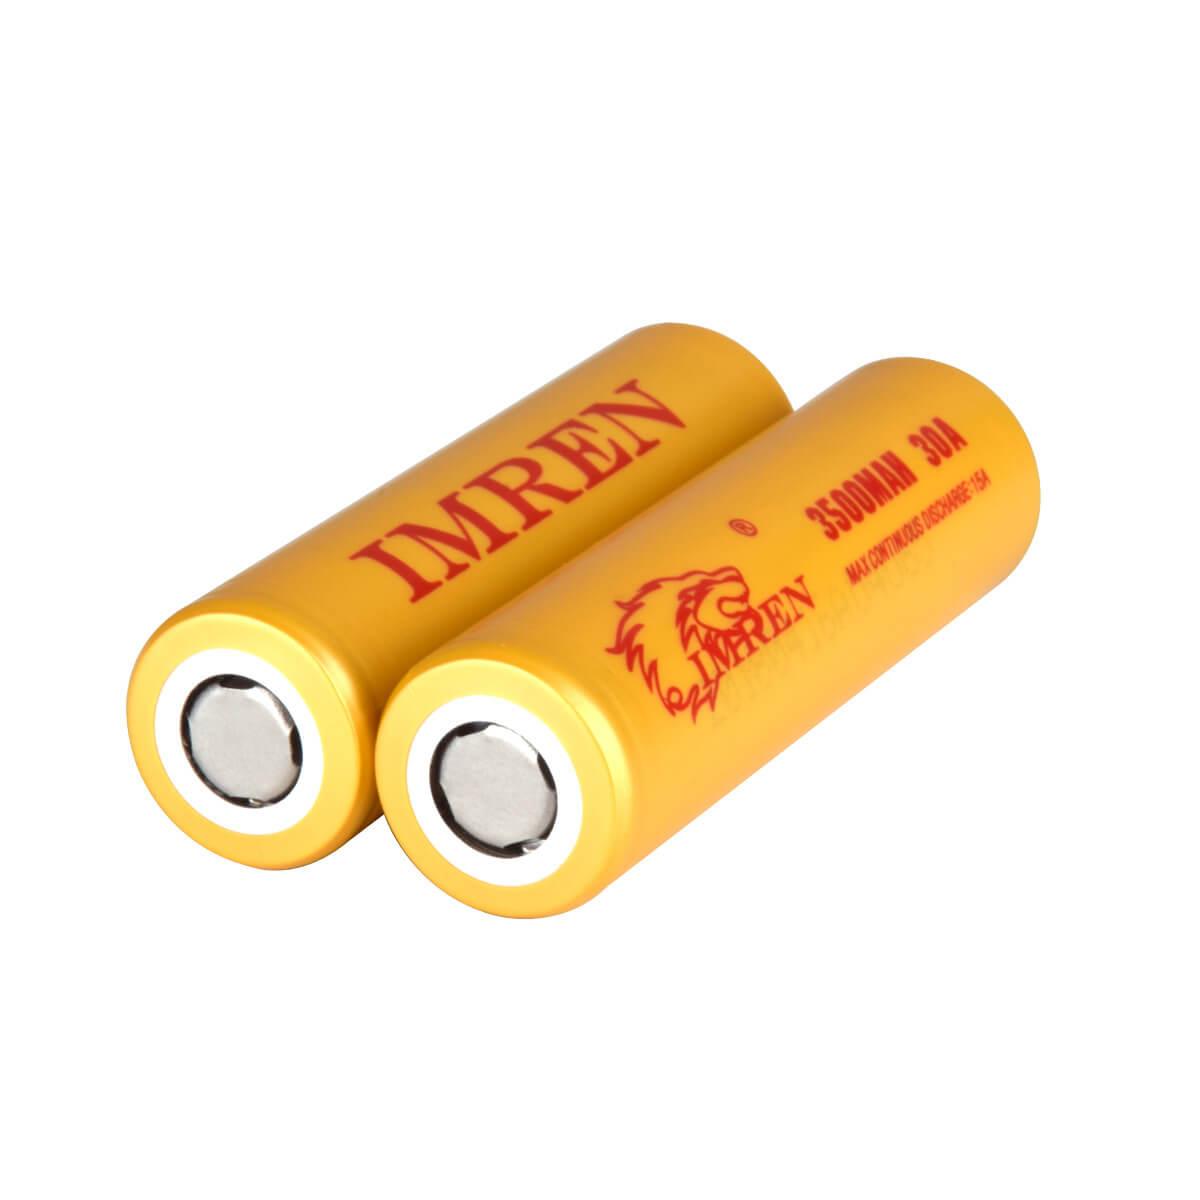 IMREN Battery Official Best Lithium-ion Choice Battery Store - Rechargeable of The